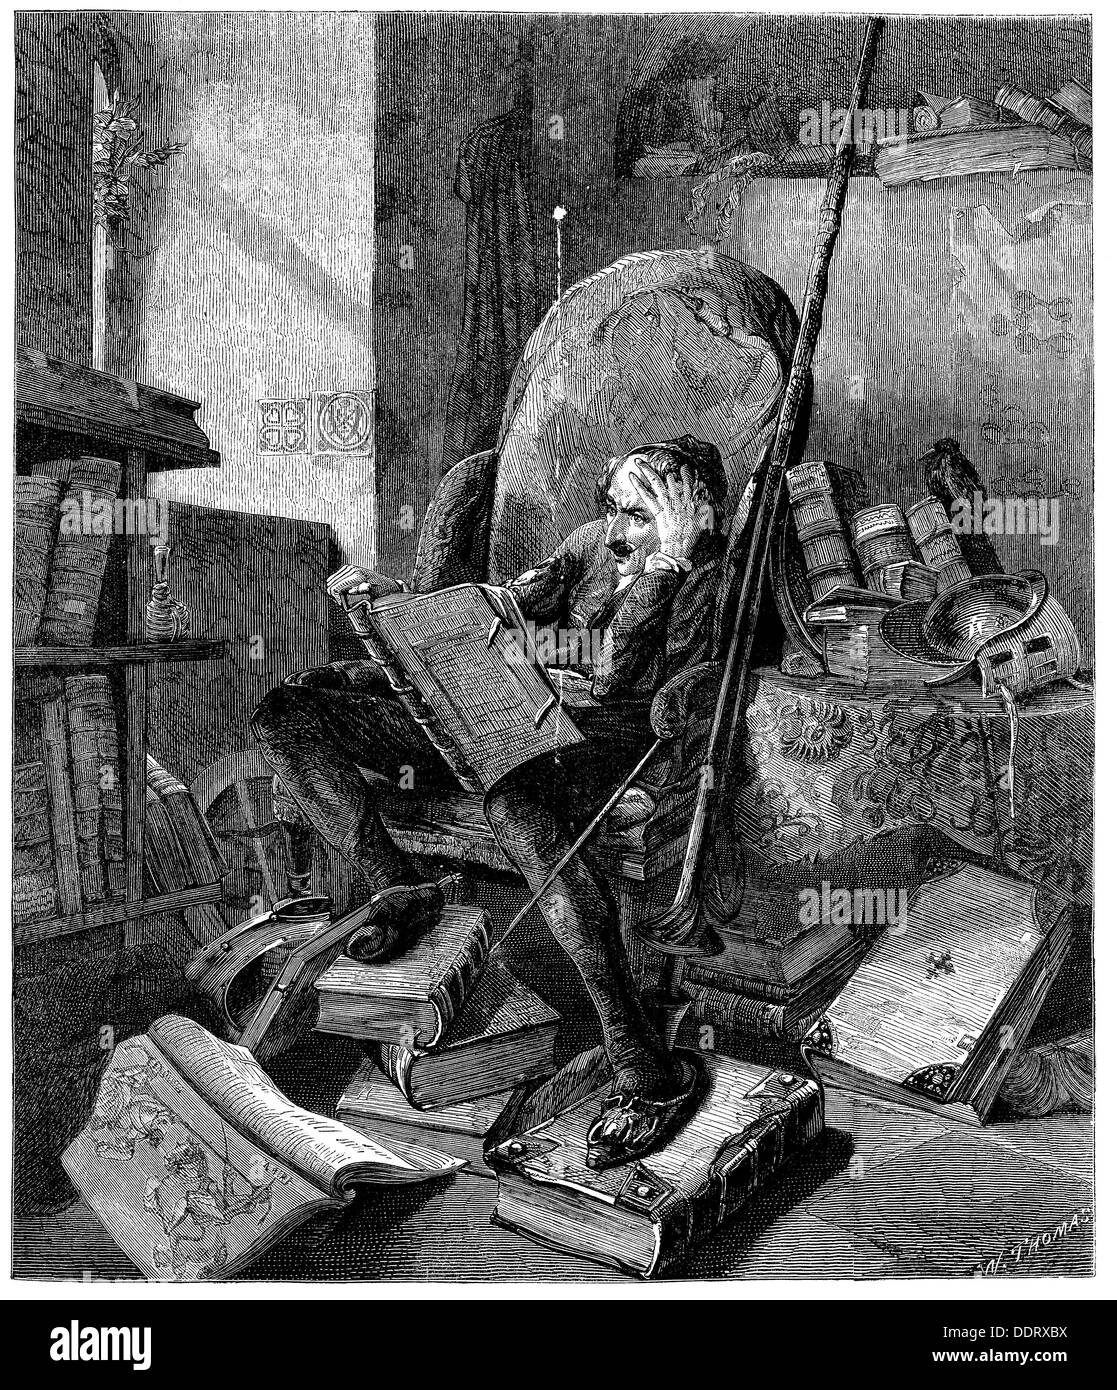 literature, Don Quixote, character of a novel by Miguel de Cervantes Saavedra (1547 - 1616), in his study, after painting by Adolf Schrödter (1805 - 1875), wood engraving by W.Thomas, 1861, Additional-Rights-Clearences-Not Available Stock Photo